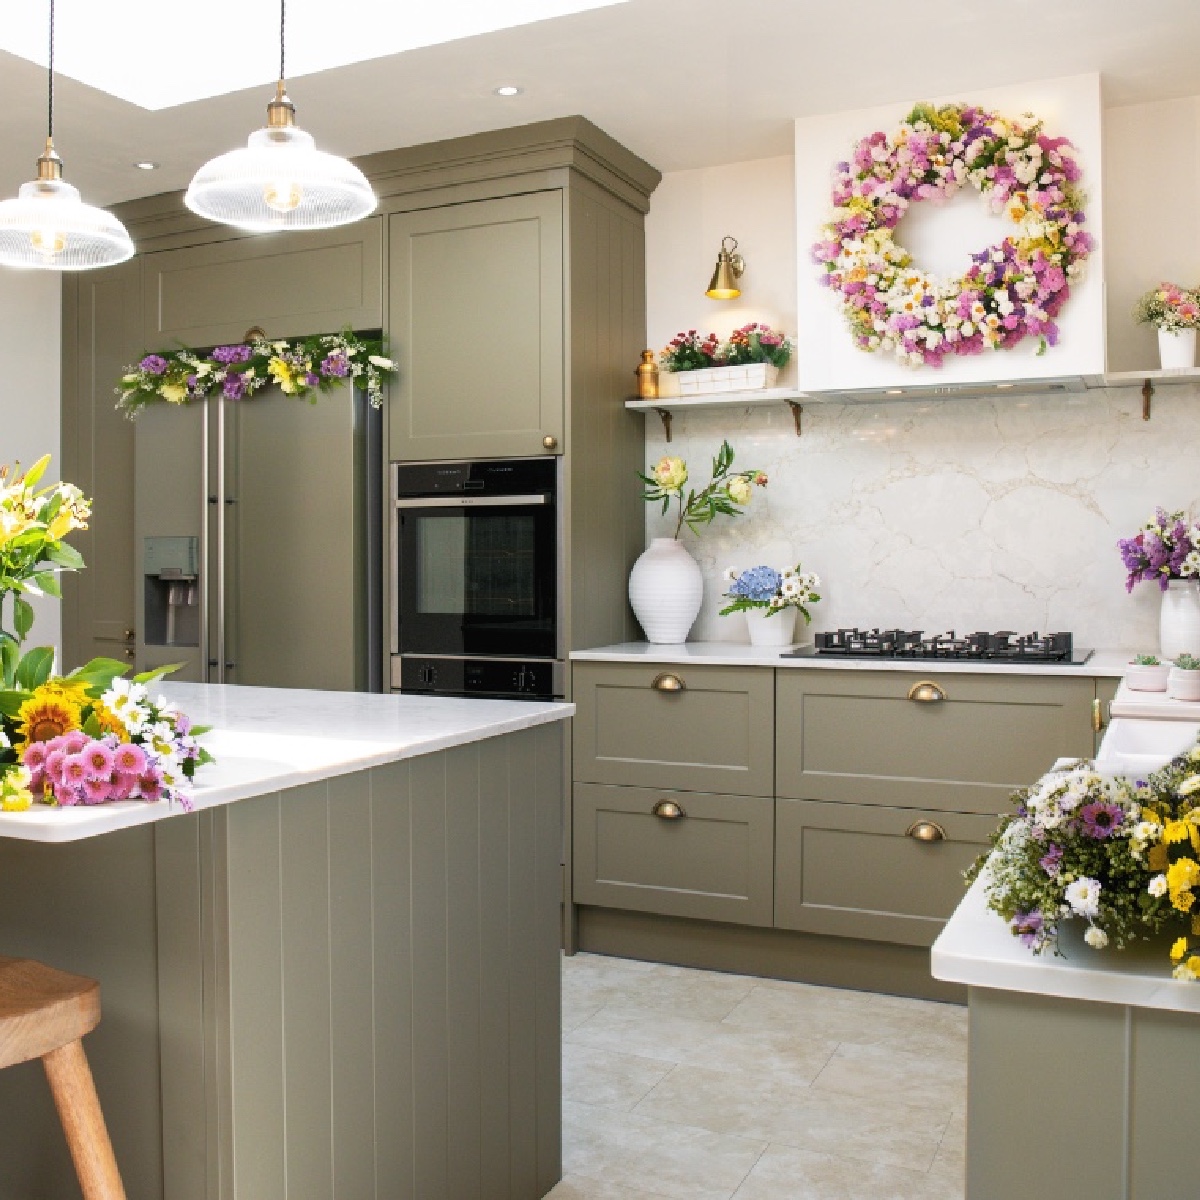 It's the season of bloom and the Chelsea Flower Show is creeping its way into this Shaker Chelsea kitchen ready for its annual return tomorrow 💐 #WrenKitchens #ShakerChelsea #ShakerStyle #FlowerPower #TableScapes #ChelseaFlowerShow #InteriorDesign #KitchenStyle #CFS2024